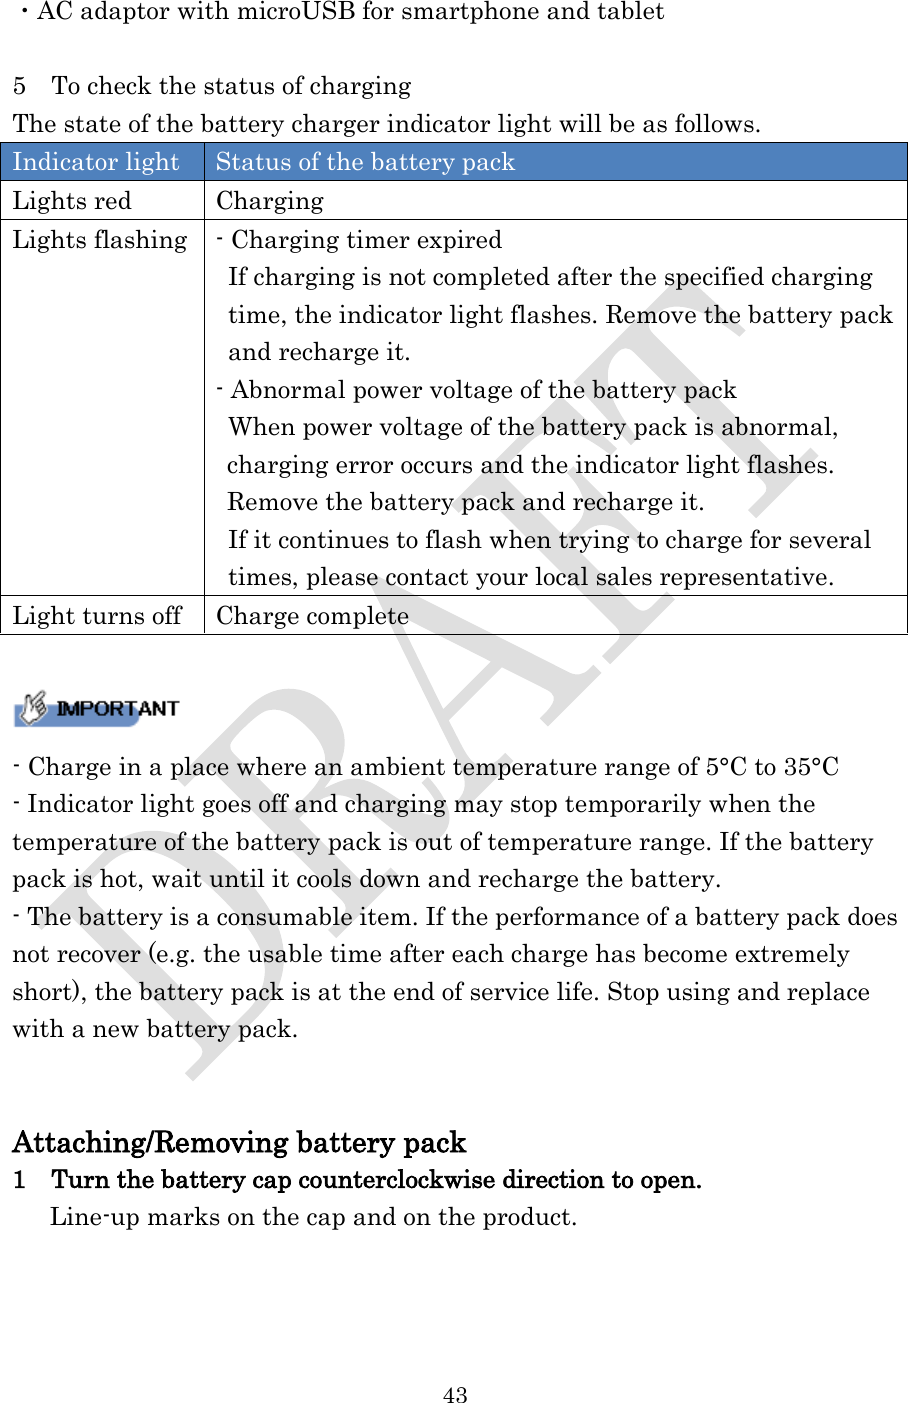  43  ・AC adaptor with microUSB for smartphone and tablet  5    To check the status of charging The state of the battery charger indicator light will be as follows. Indicator light Status of the battery pack Lights red Charging Lights flashing - Charging timer expired  If charging is not completed after the specified charging   time, the indicator light flashes. Remove the battery pack  and recharge it. - Abnormal power voltage of the battery pack When power voltage of the battery pack is abnormal, charging error occurs and the indicator light flashes. Remove the battery pack and recharge it. If it continues to flash when trying to charge for several   times, please contact your local sales representative. Light turns off Charge complete   - Charge in a place where an ambient temperature range of 5°C to 35°C - Indicator light goes off and charging may stop temporarily when the temperature of the battery pack is out of temperature range. If the battery pack is hot, wait until it cools down and recharge the battery. - The battery is a consumable item. If the performance of a battery pack does not recover (e.g. the usable time after each charge has become extremely short), the battery pack is at the end of service life. Stop using and replace with a new battery pack.   Attaching/Removing battery pack 1  Turn the battery cap counterclockwise direction to open.  Line-up marks on the cap and on the product. 